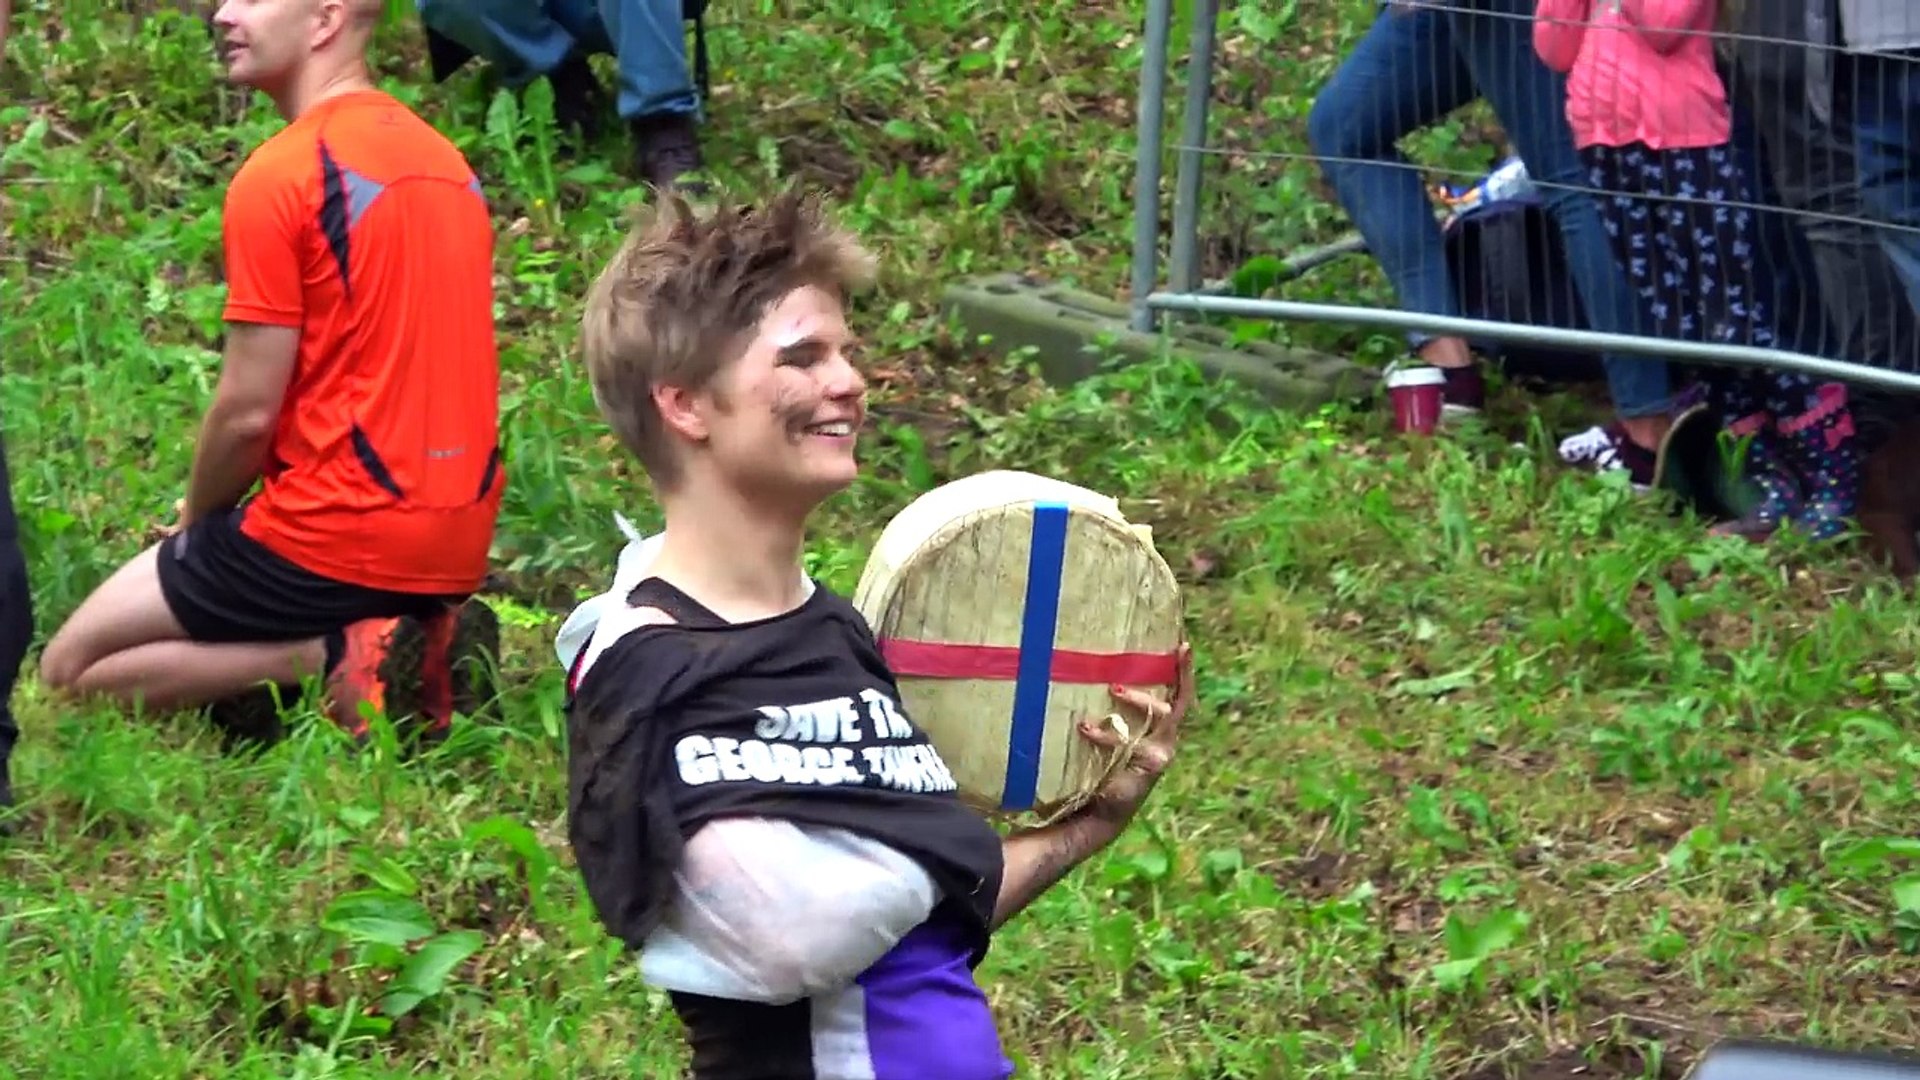 cheese rolling contest 2018 in UK - Vidéo Dailymotion